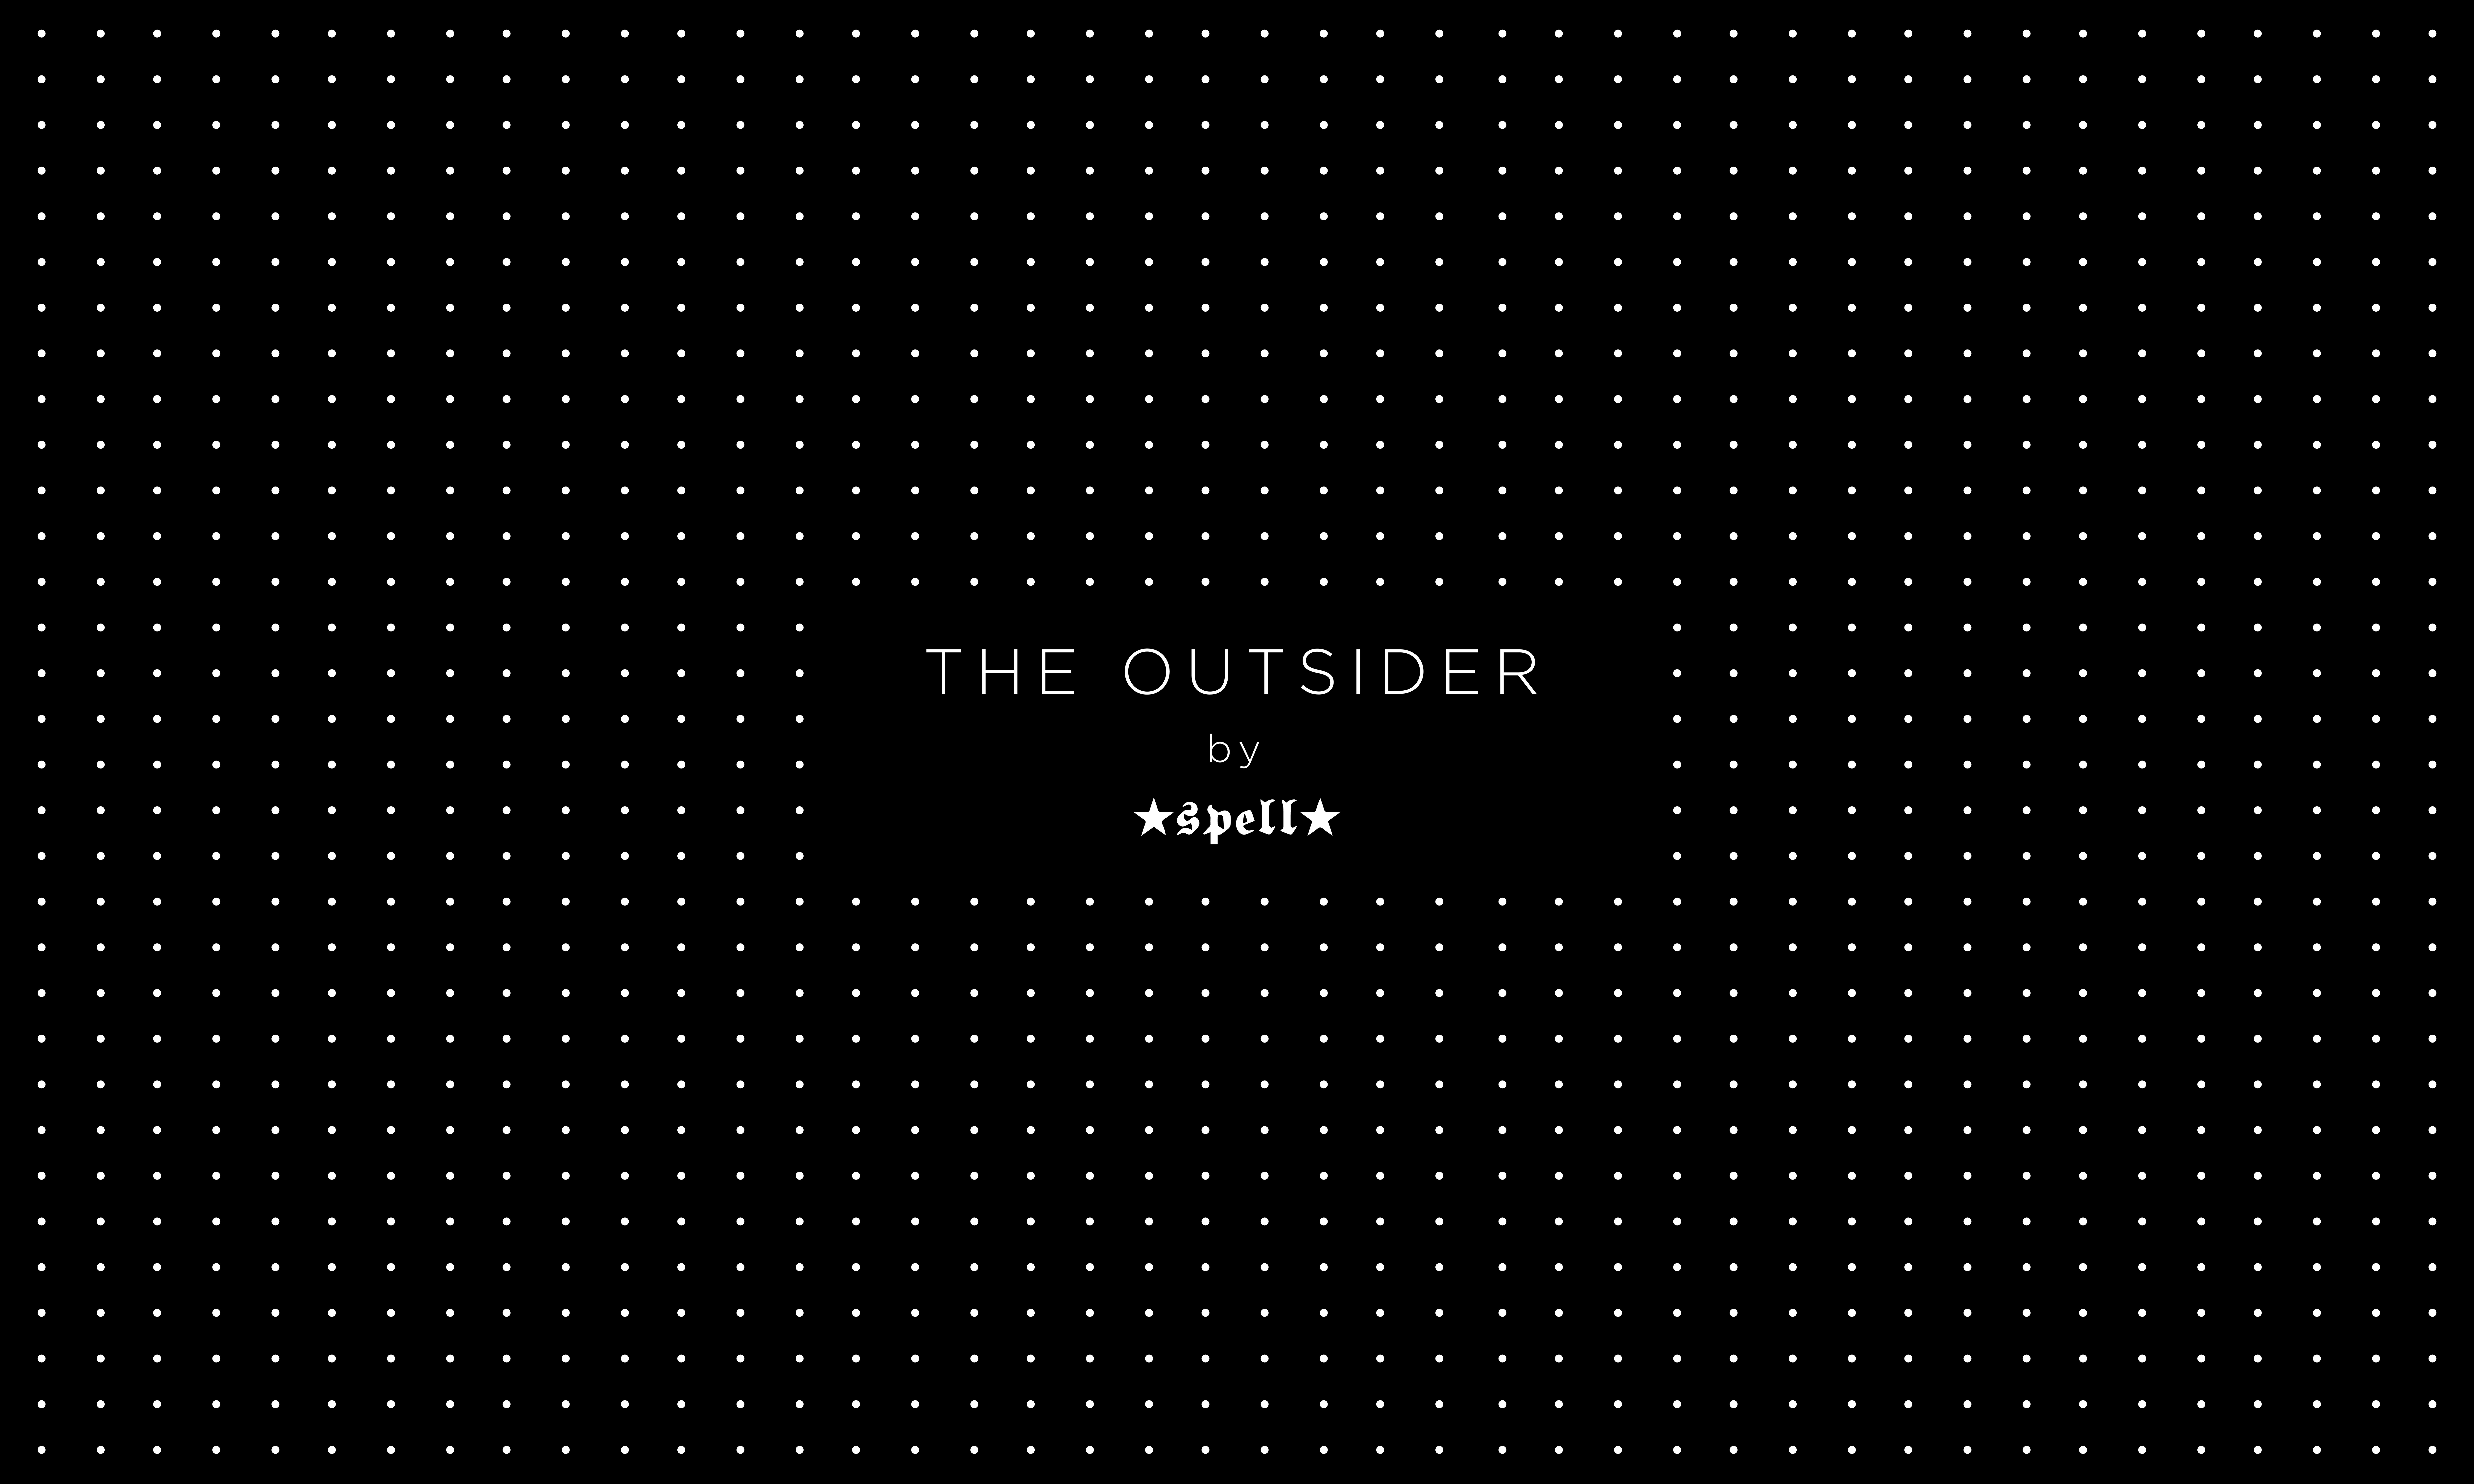 THE OUTSIDER by ✭𝖘𝖕𝖊𝖑𝖑✭